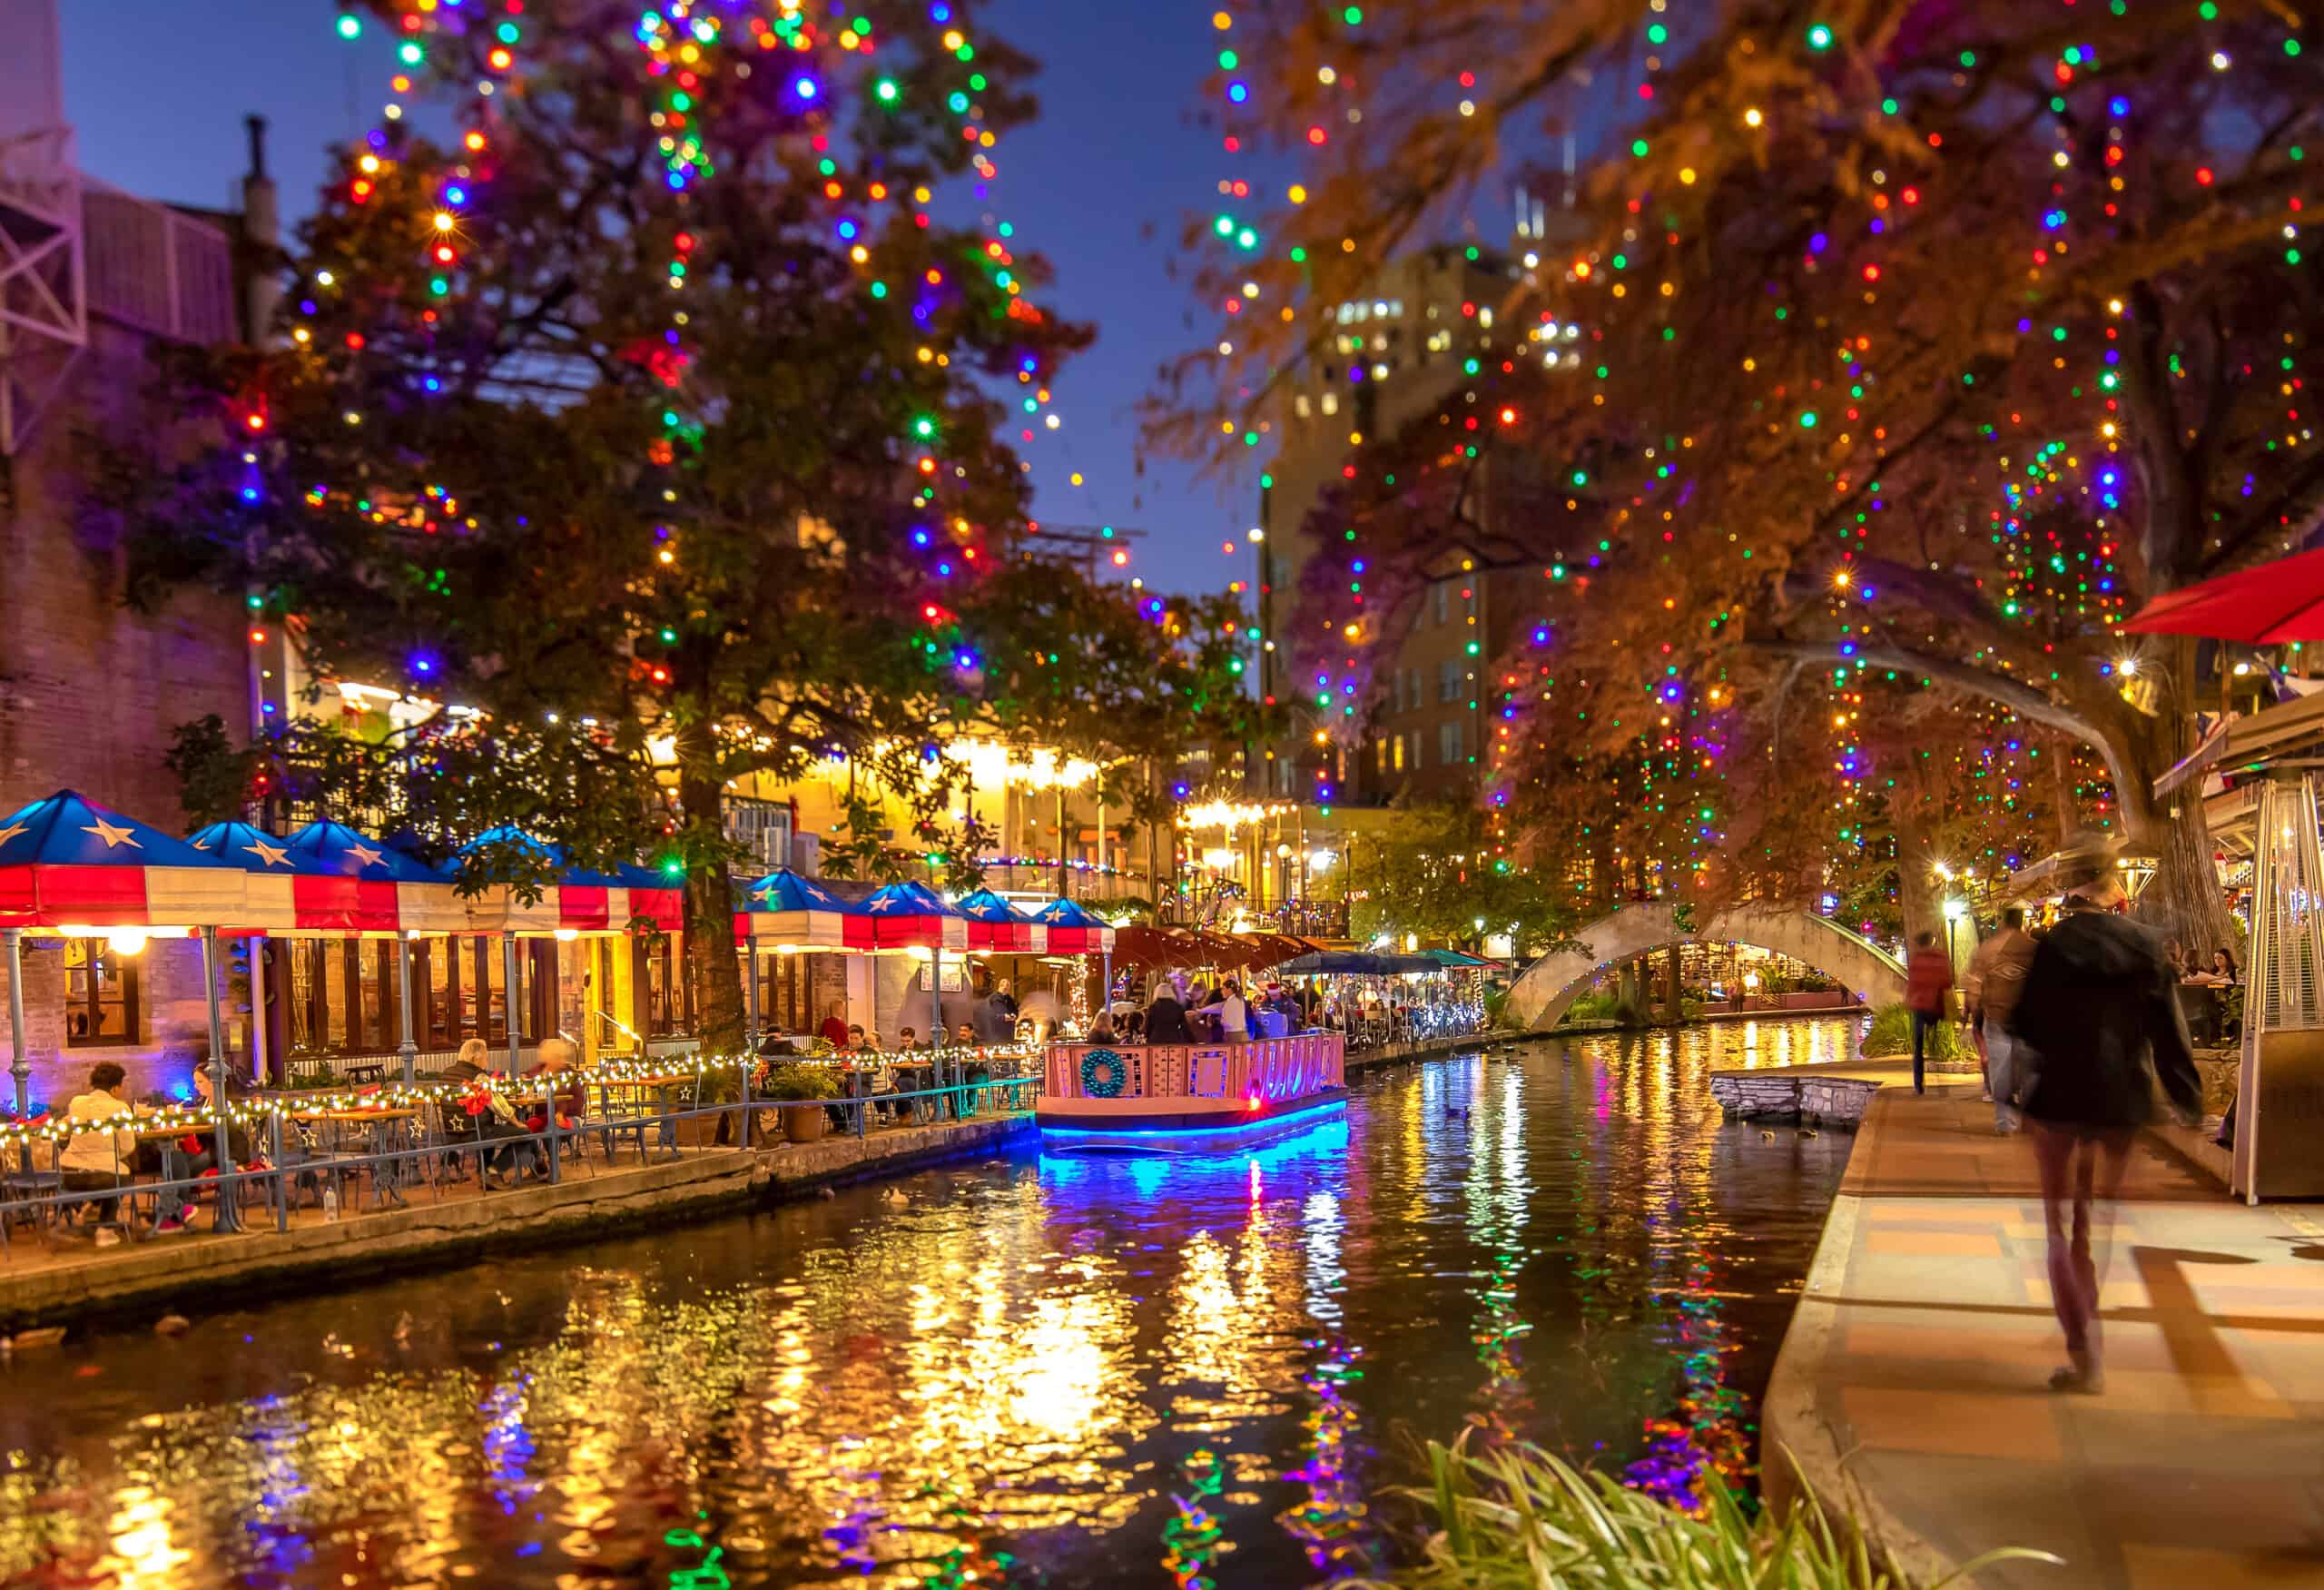 Things to Do in San Antonio: Top Attractions, Activities & More